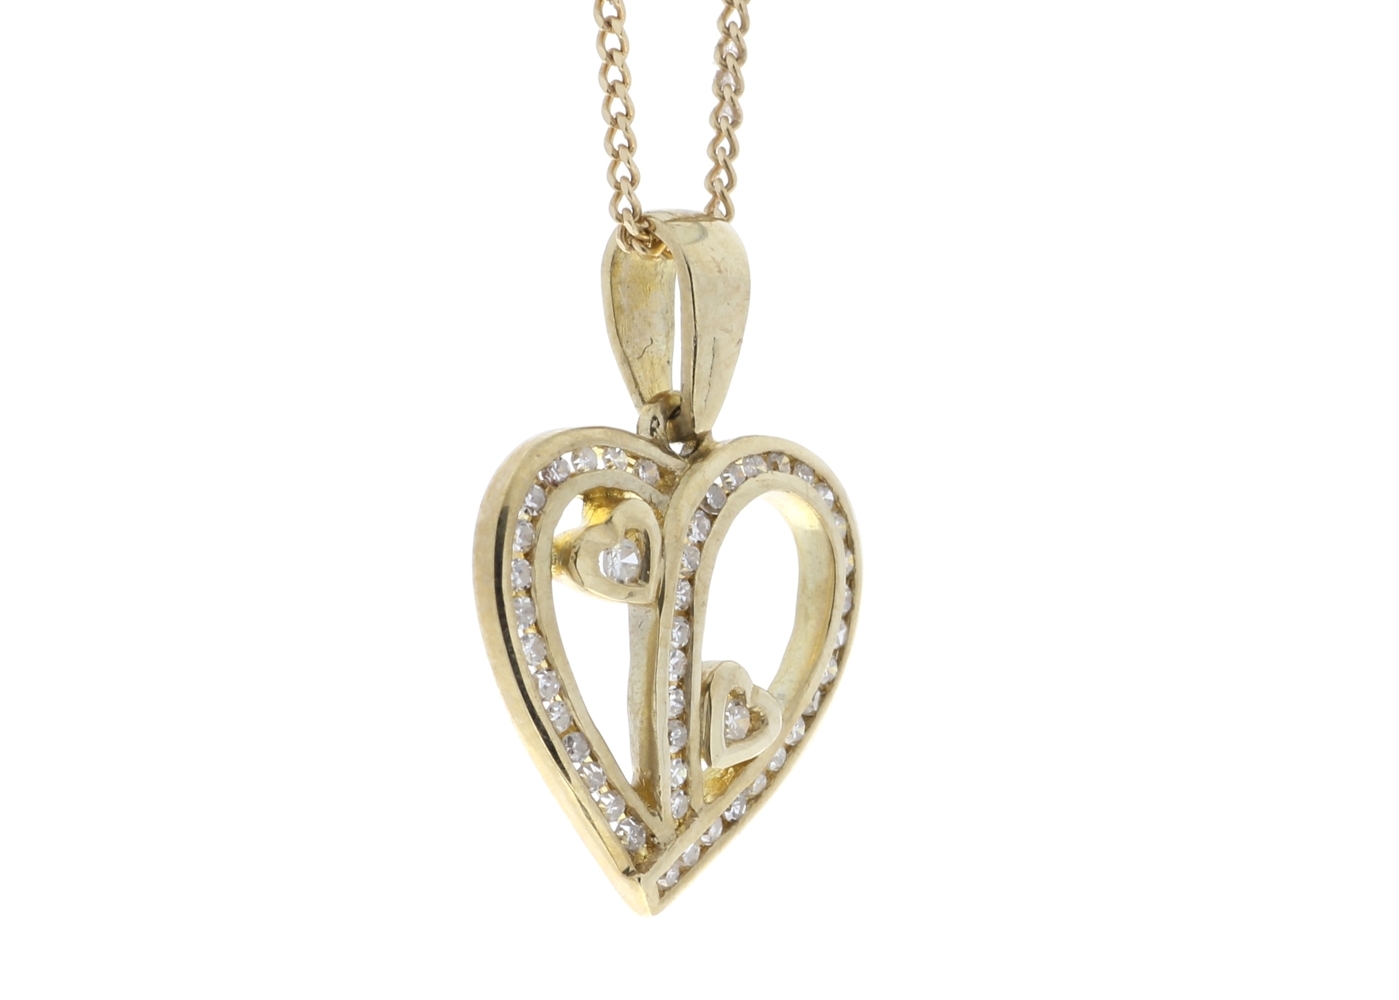 9ct Yellow Gold Heart Pendant Set With Diamonds 0.23 Carats - Image 2 of 5